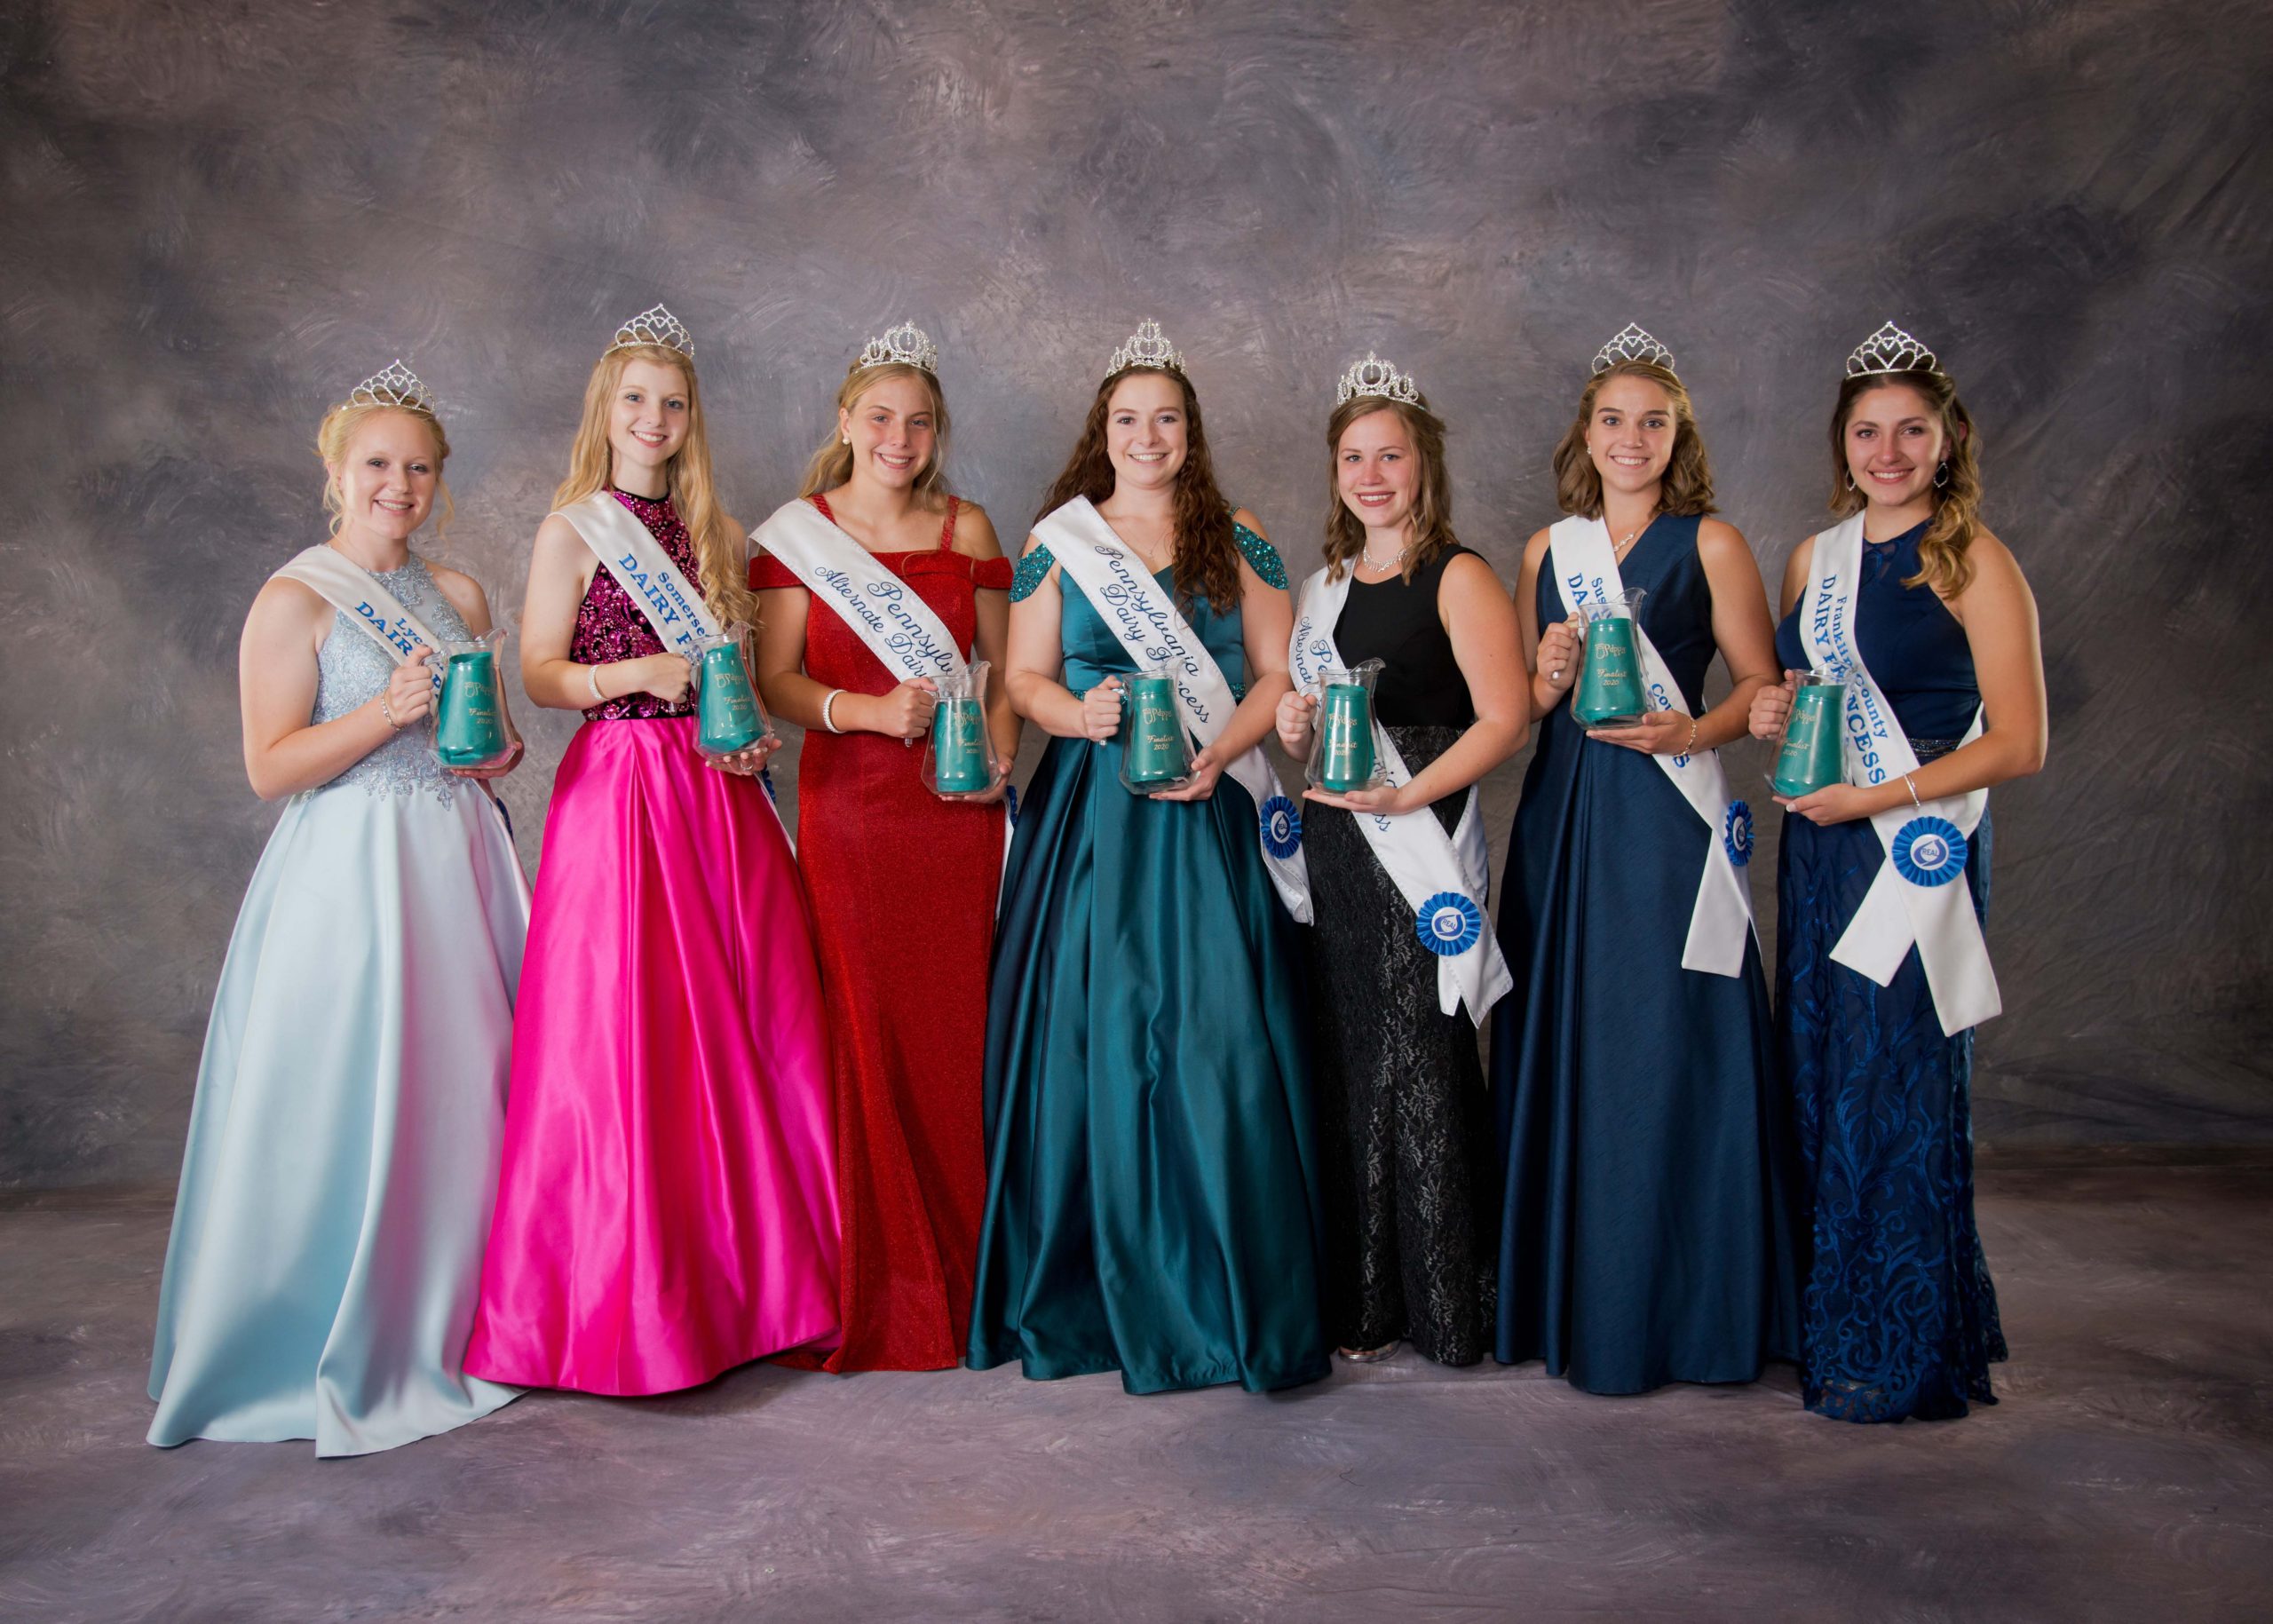 STATE PAGEANT Pennsylvania Dairy Princess & Promotion Services, Inc.